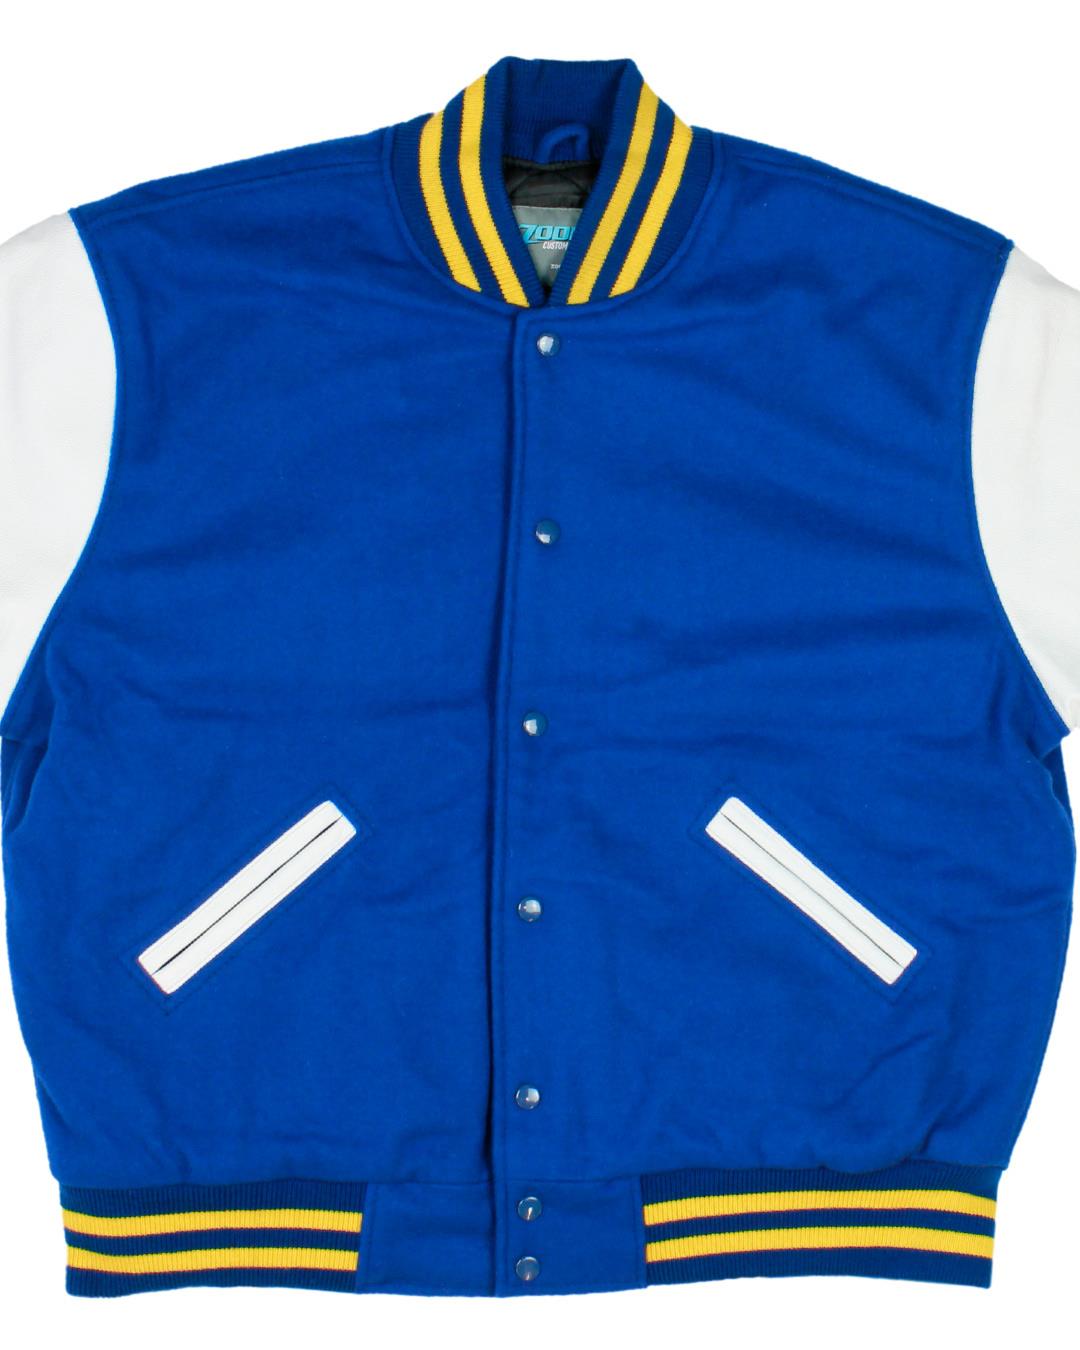 Irondequoit High School Letterman Jacket, Rochester, NY - Front